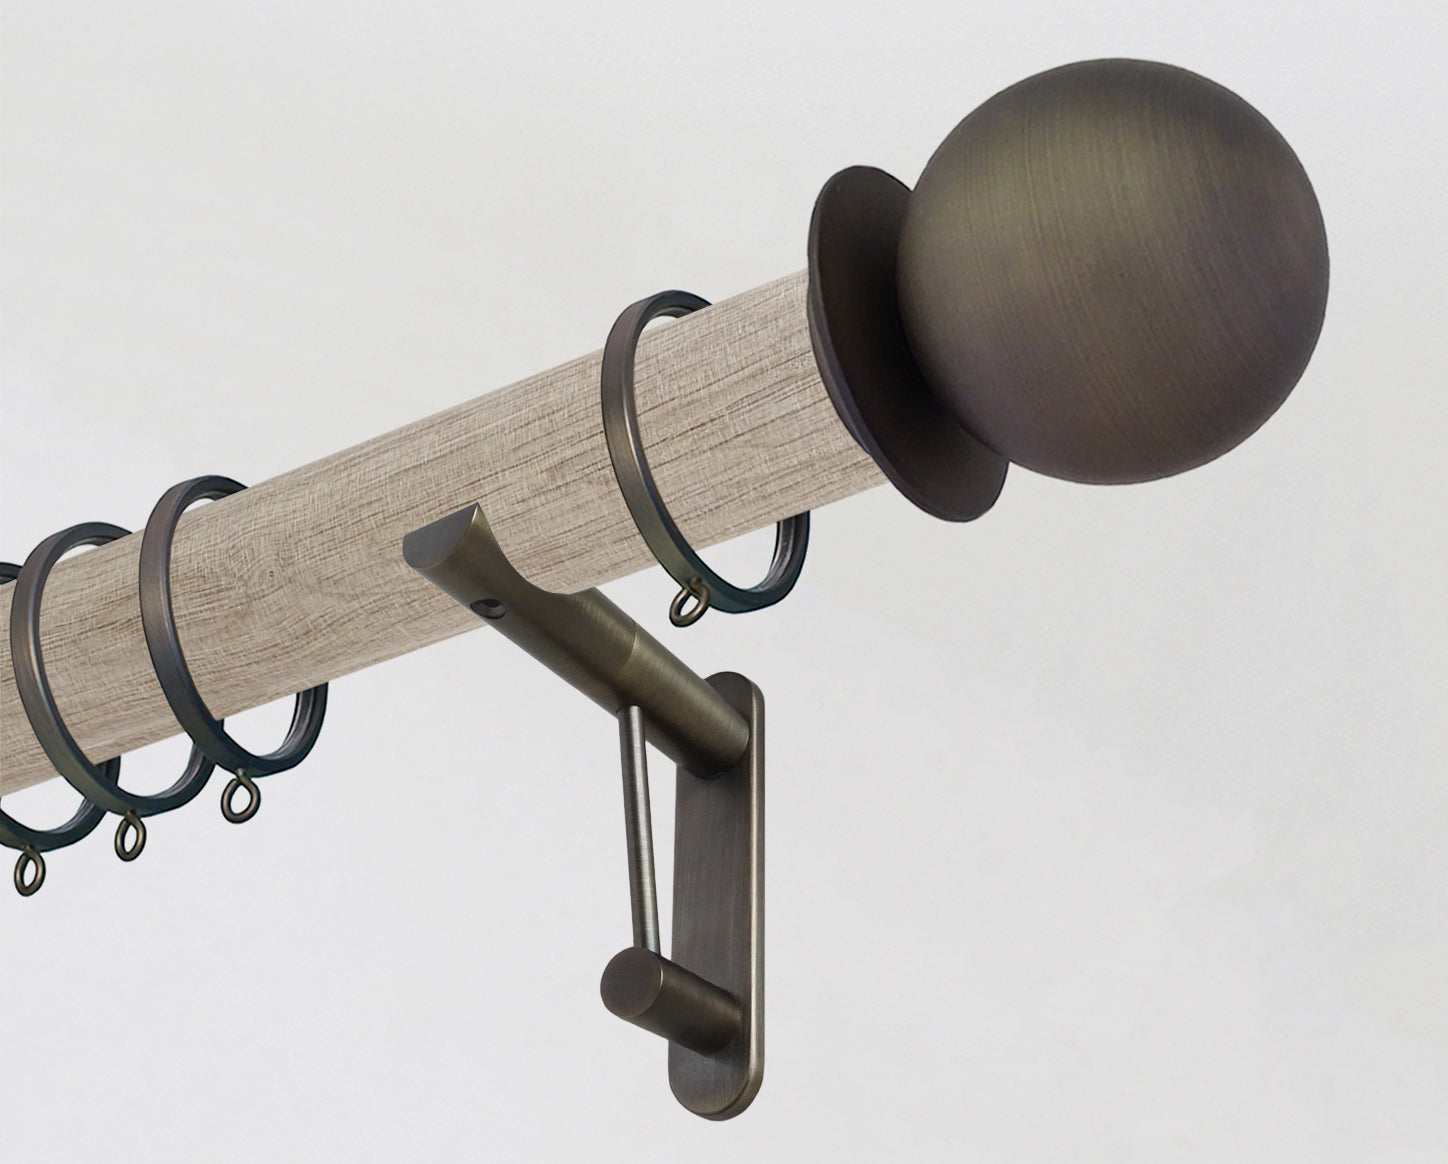 50mm dia. unfinished real oak wood curtain pole set with metal ball finials